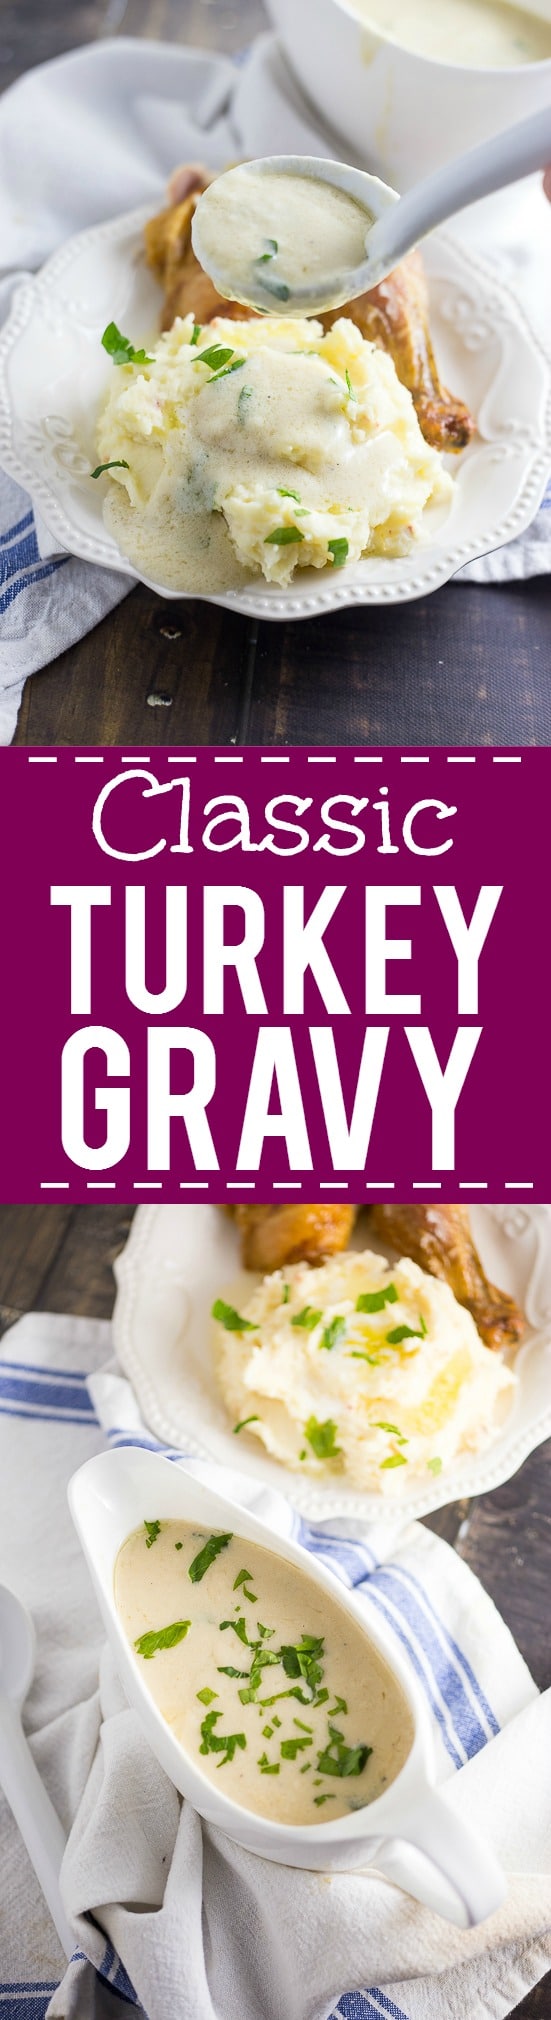 Easy Classic Turkey Gravy Recipe with a secret ingredient that makes it totally amazing. Perfect for Thanksgiving! A simple classic Turkey Gravy recipe that is guaranteed to please on your Thanksgiving table. The perfect turkey gravy recipe to complement your gorgeous Thanksgiving turkey.